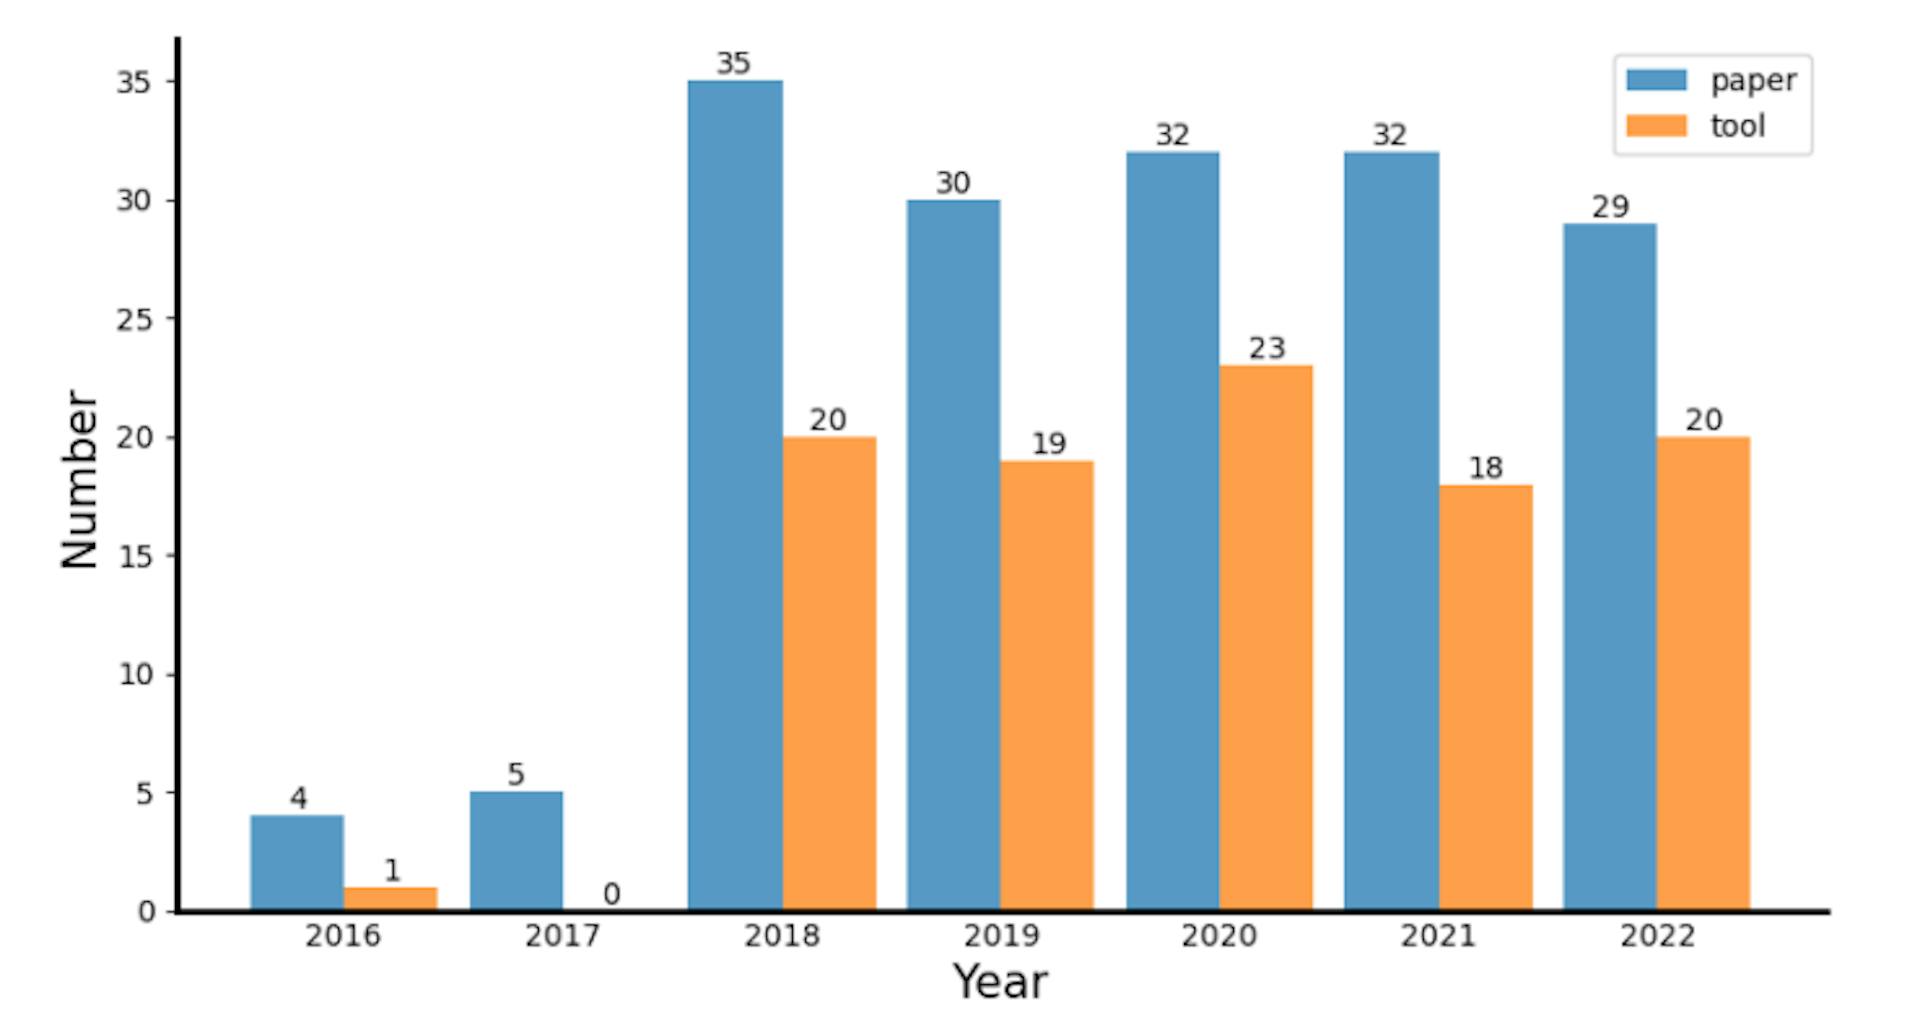 Fig. 1. Papers published in the previous study from 2016 to 2022